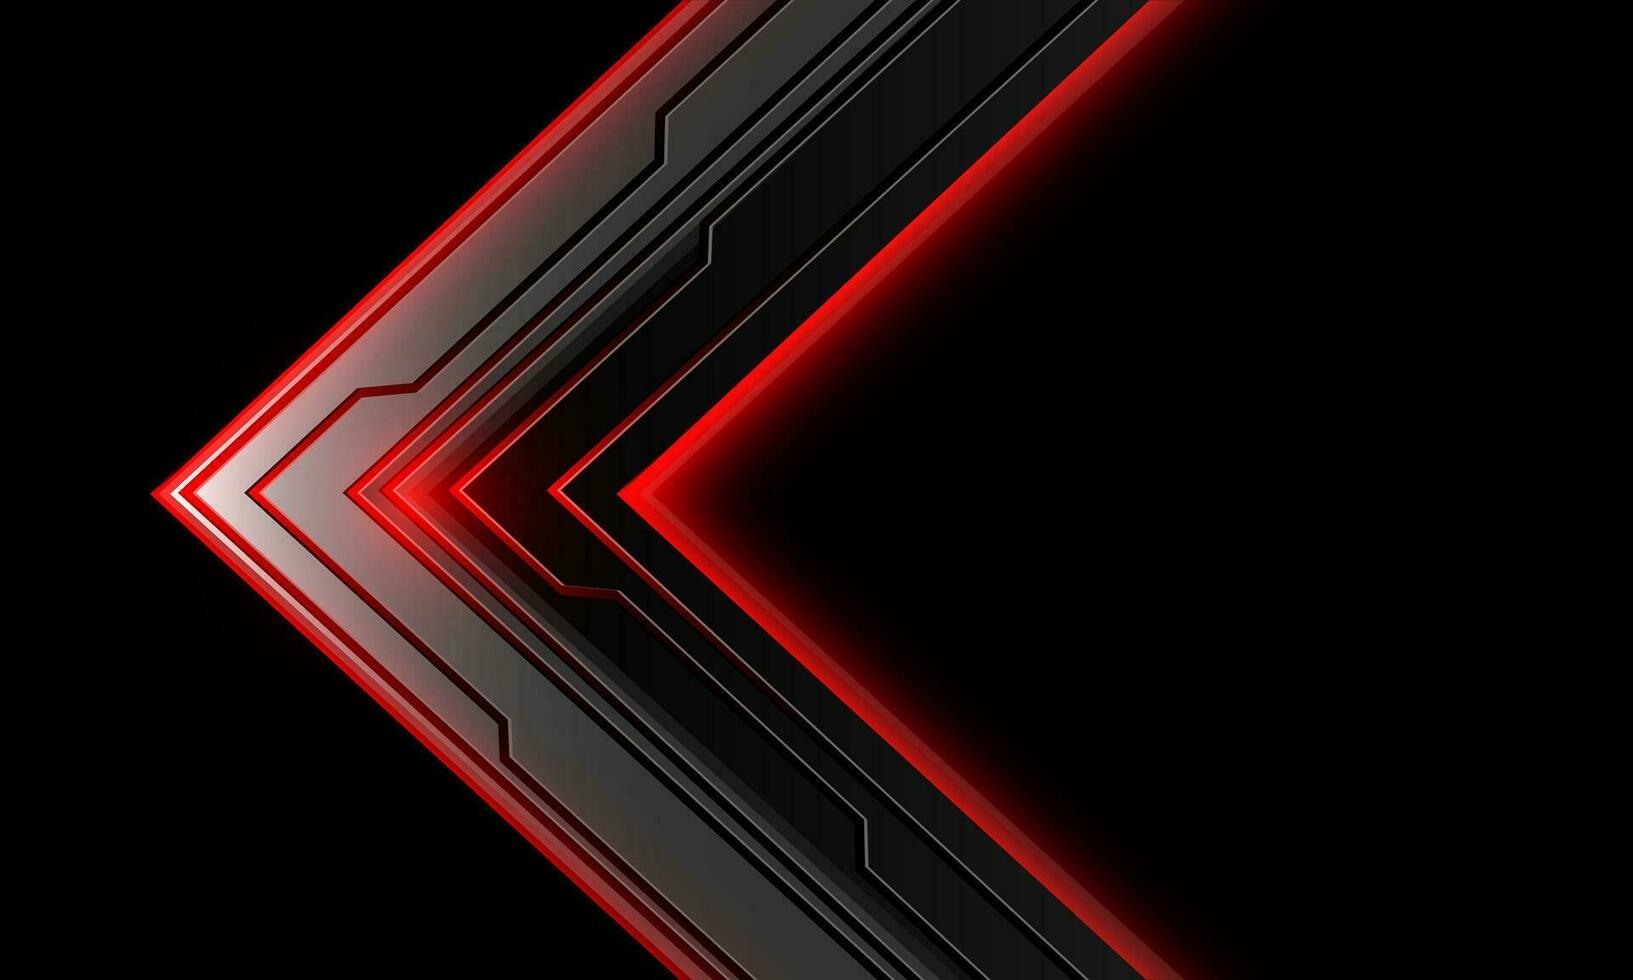 Abstract arrow cyber red light geomatric on black blank space design ultramodern futuristic creative background vector